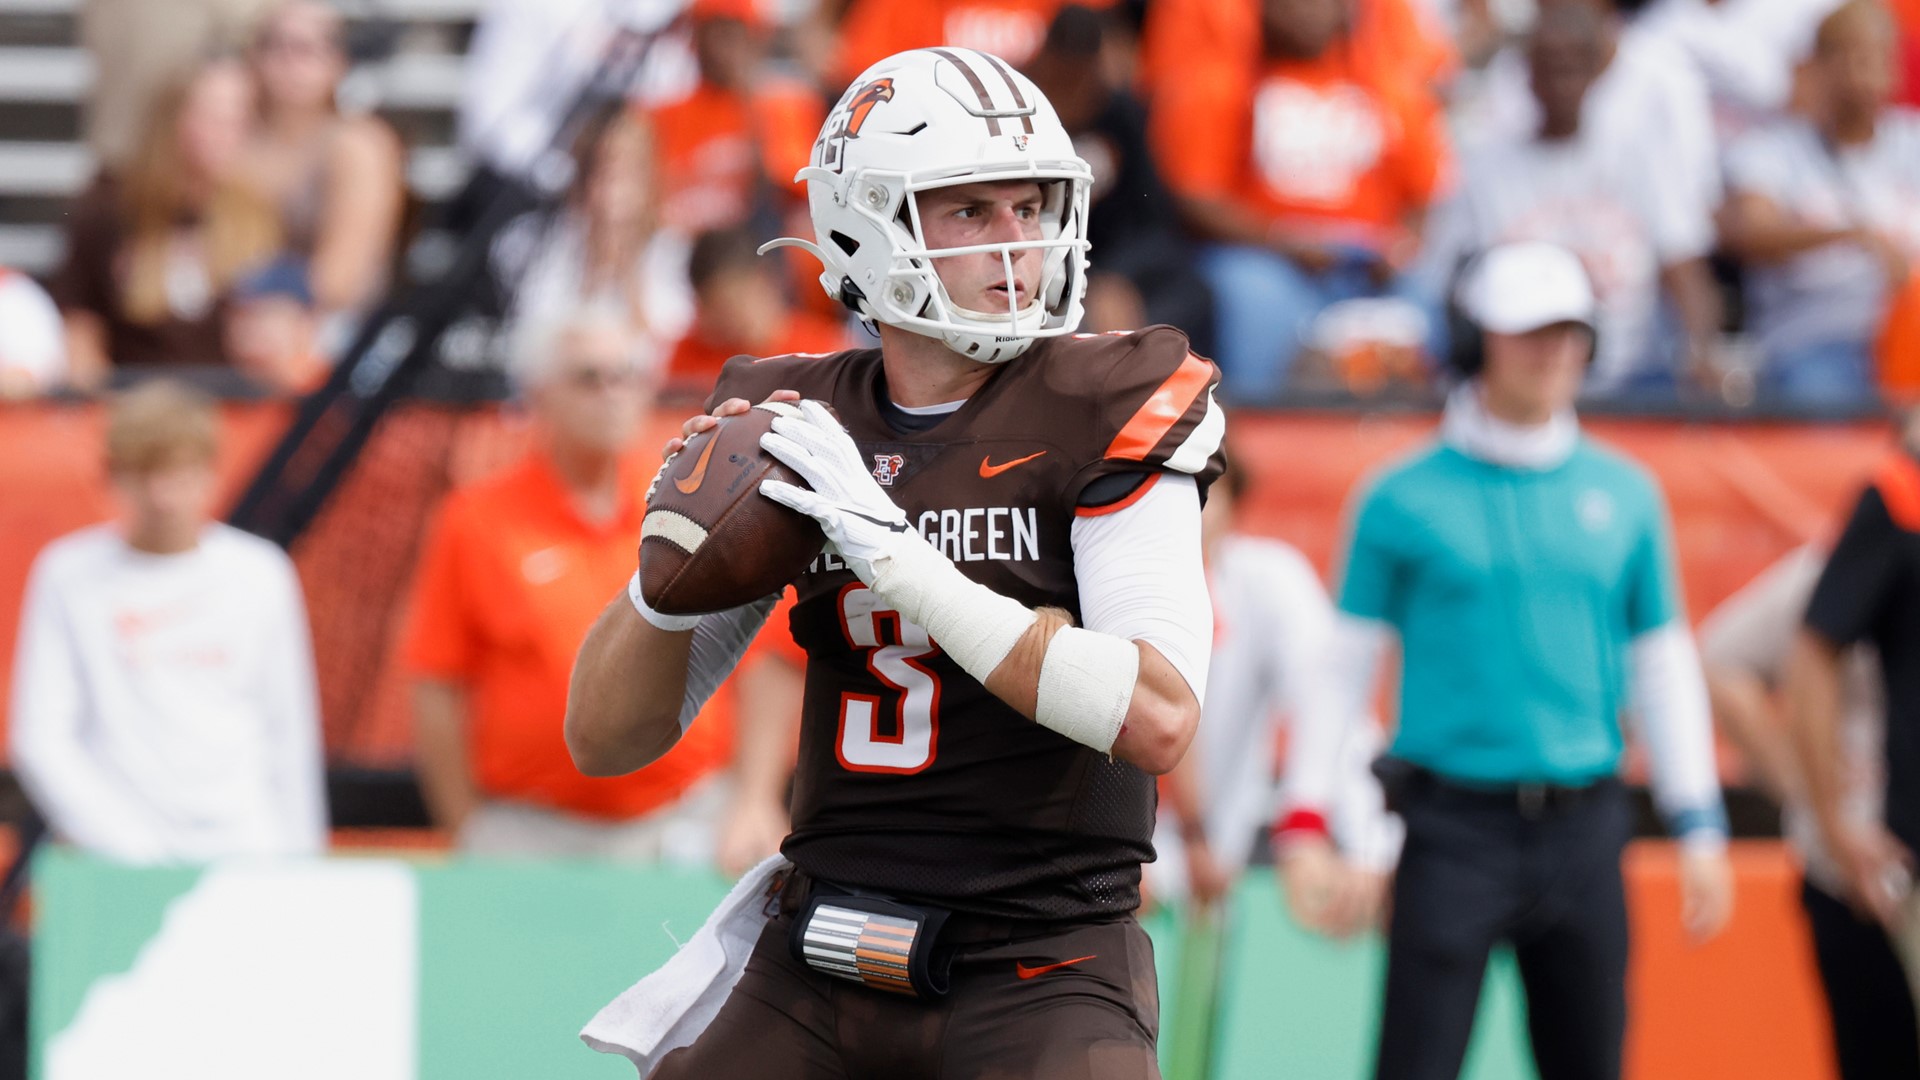 As Bowling Green gets set for the Quick Lane Bowl in Detroit, Matt McDonald will be suiting up for the last time in the orange and brown after four seasons.